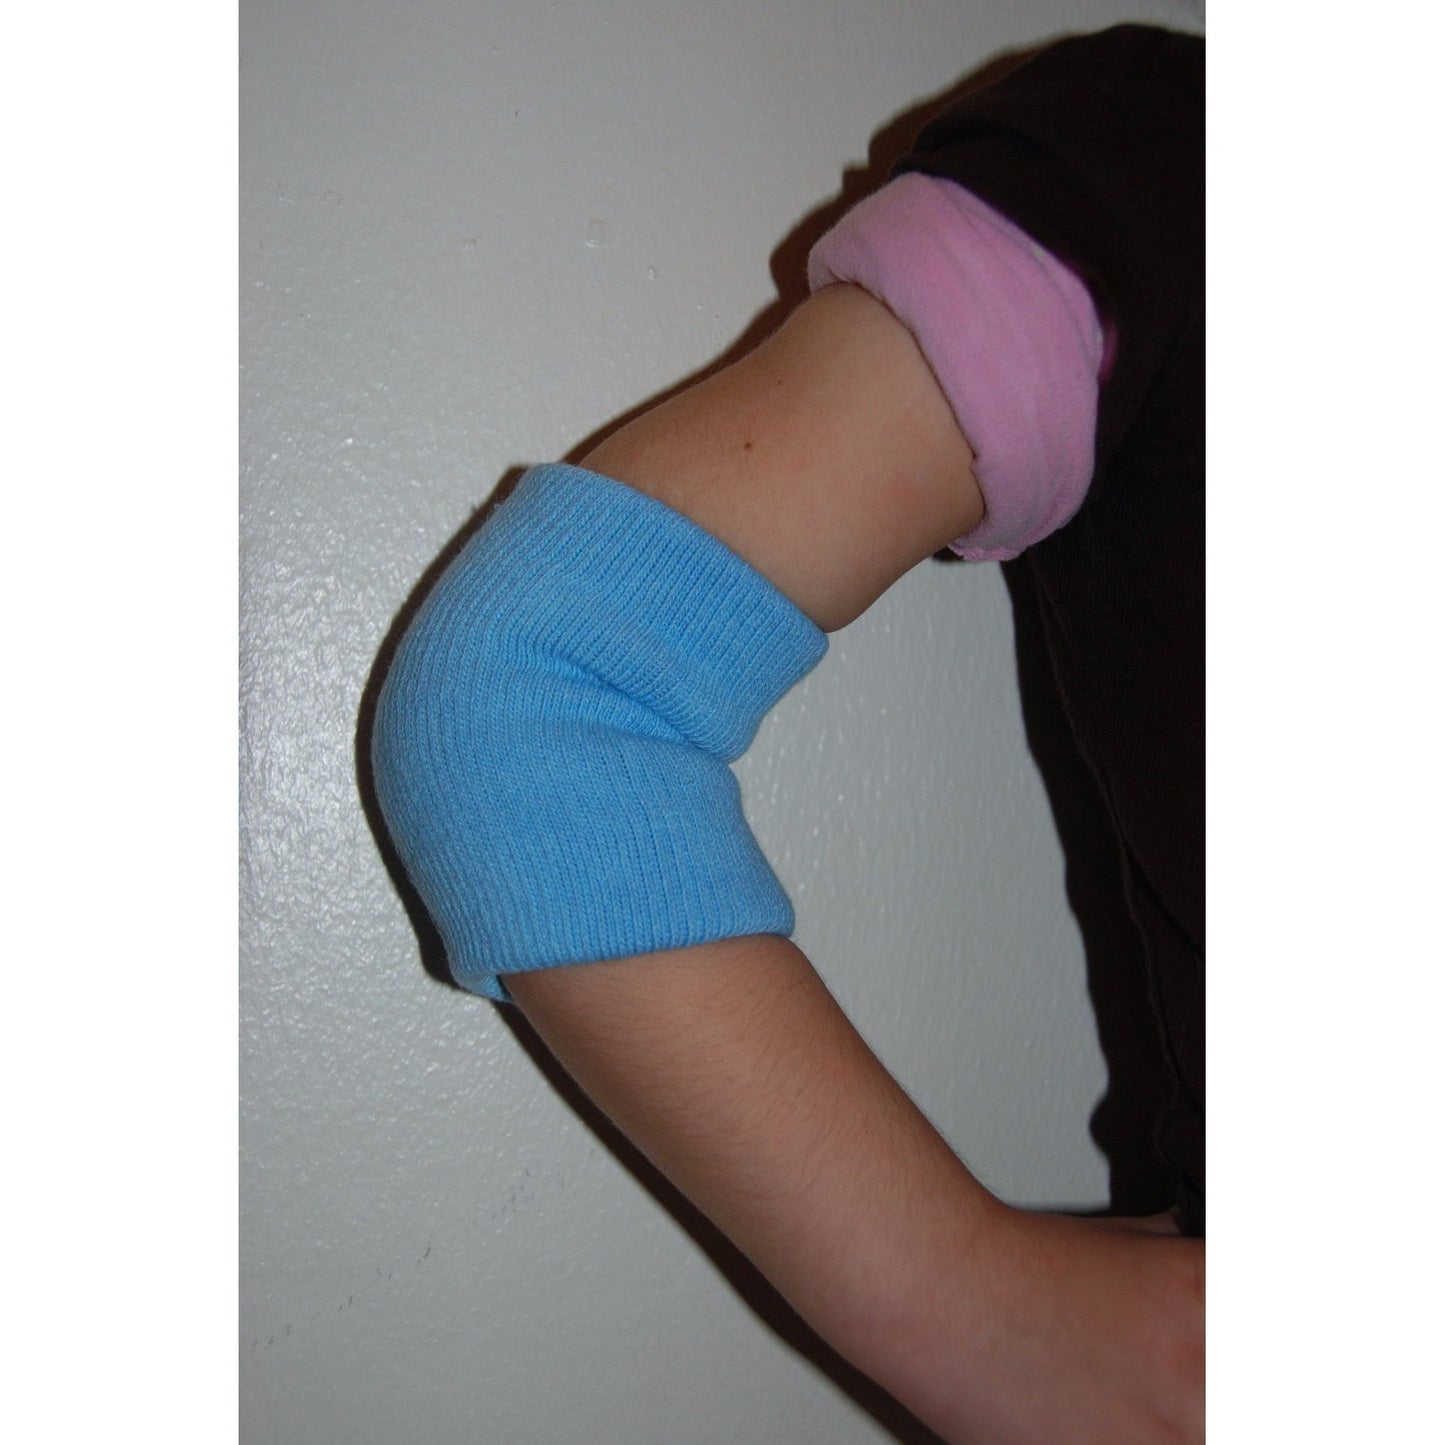 Soft Protective Elbow Pads for Kids, More Colors Available-Safety Products-KneeBees